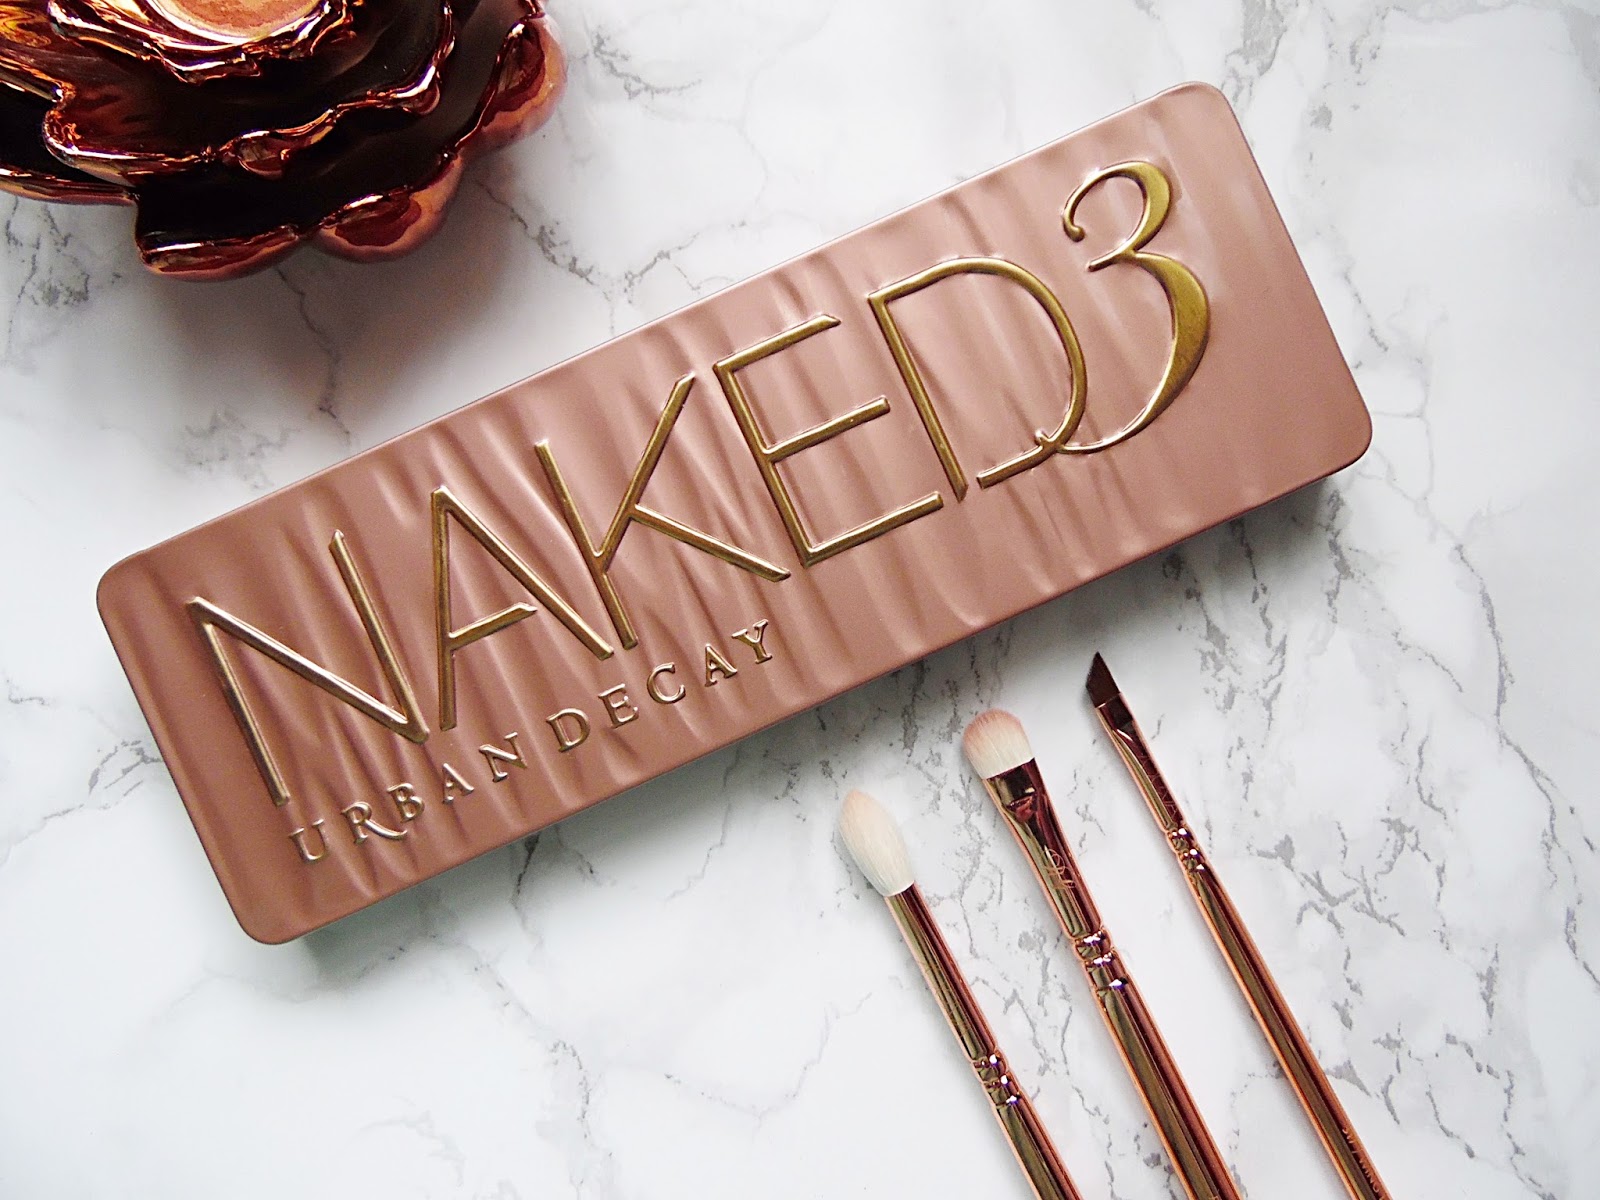 Urban Decay Naked 3 Palette 